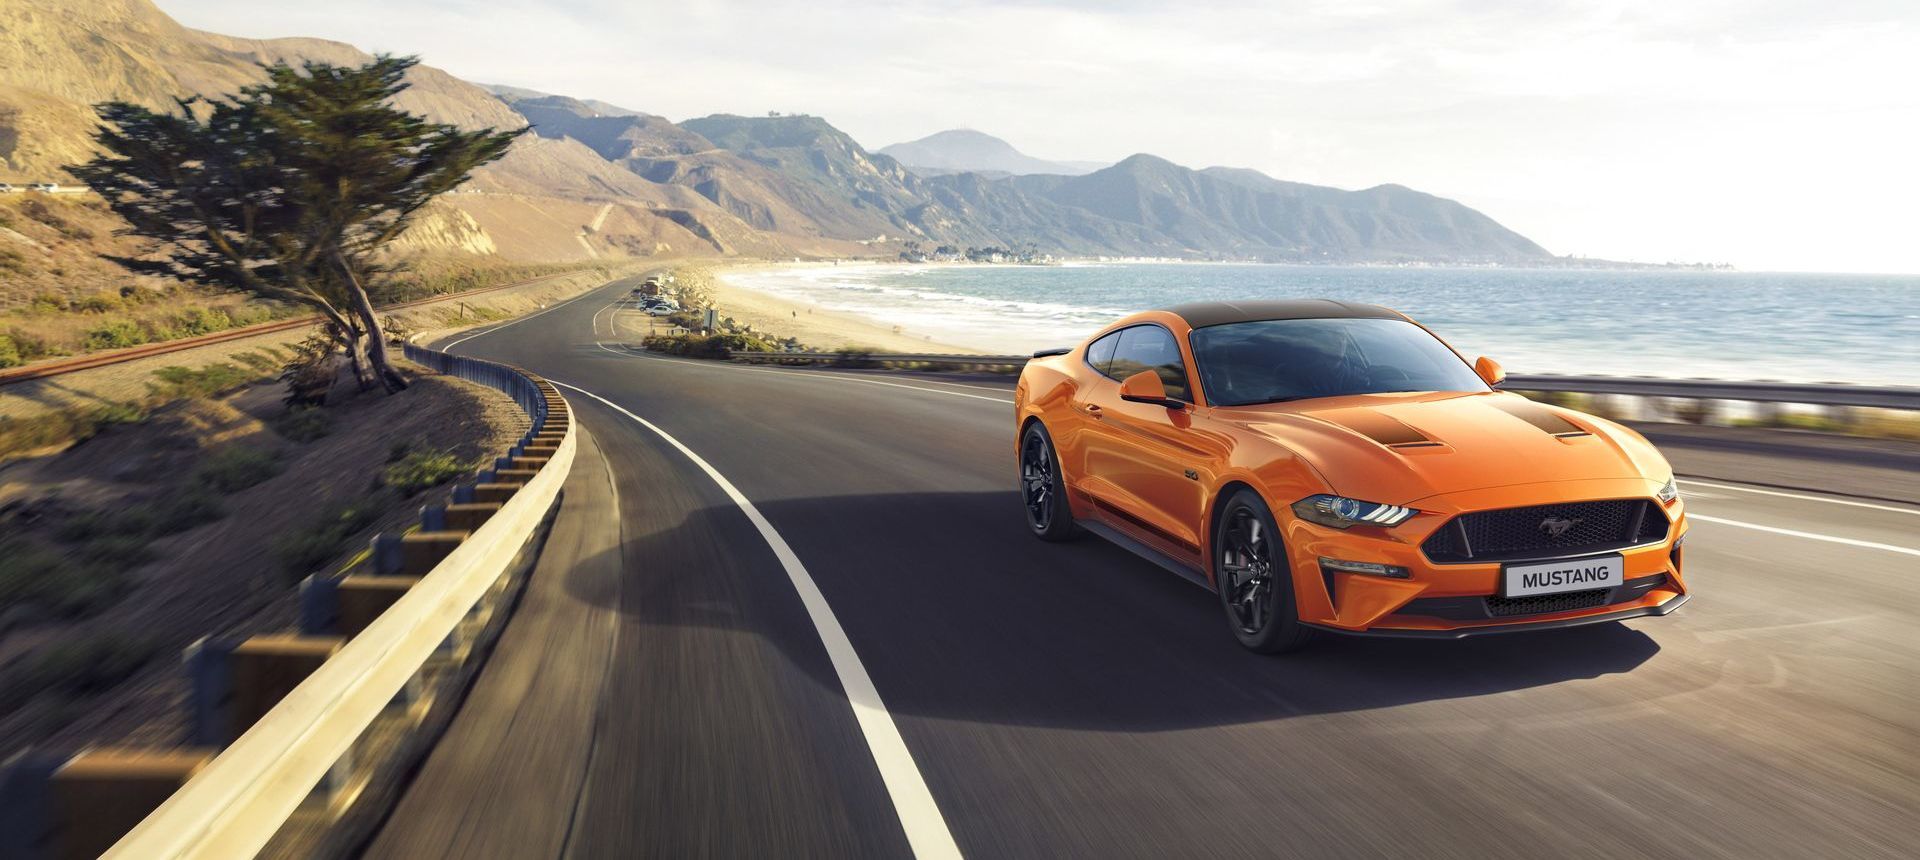 Ford 2019 Mustang 55